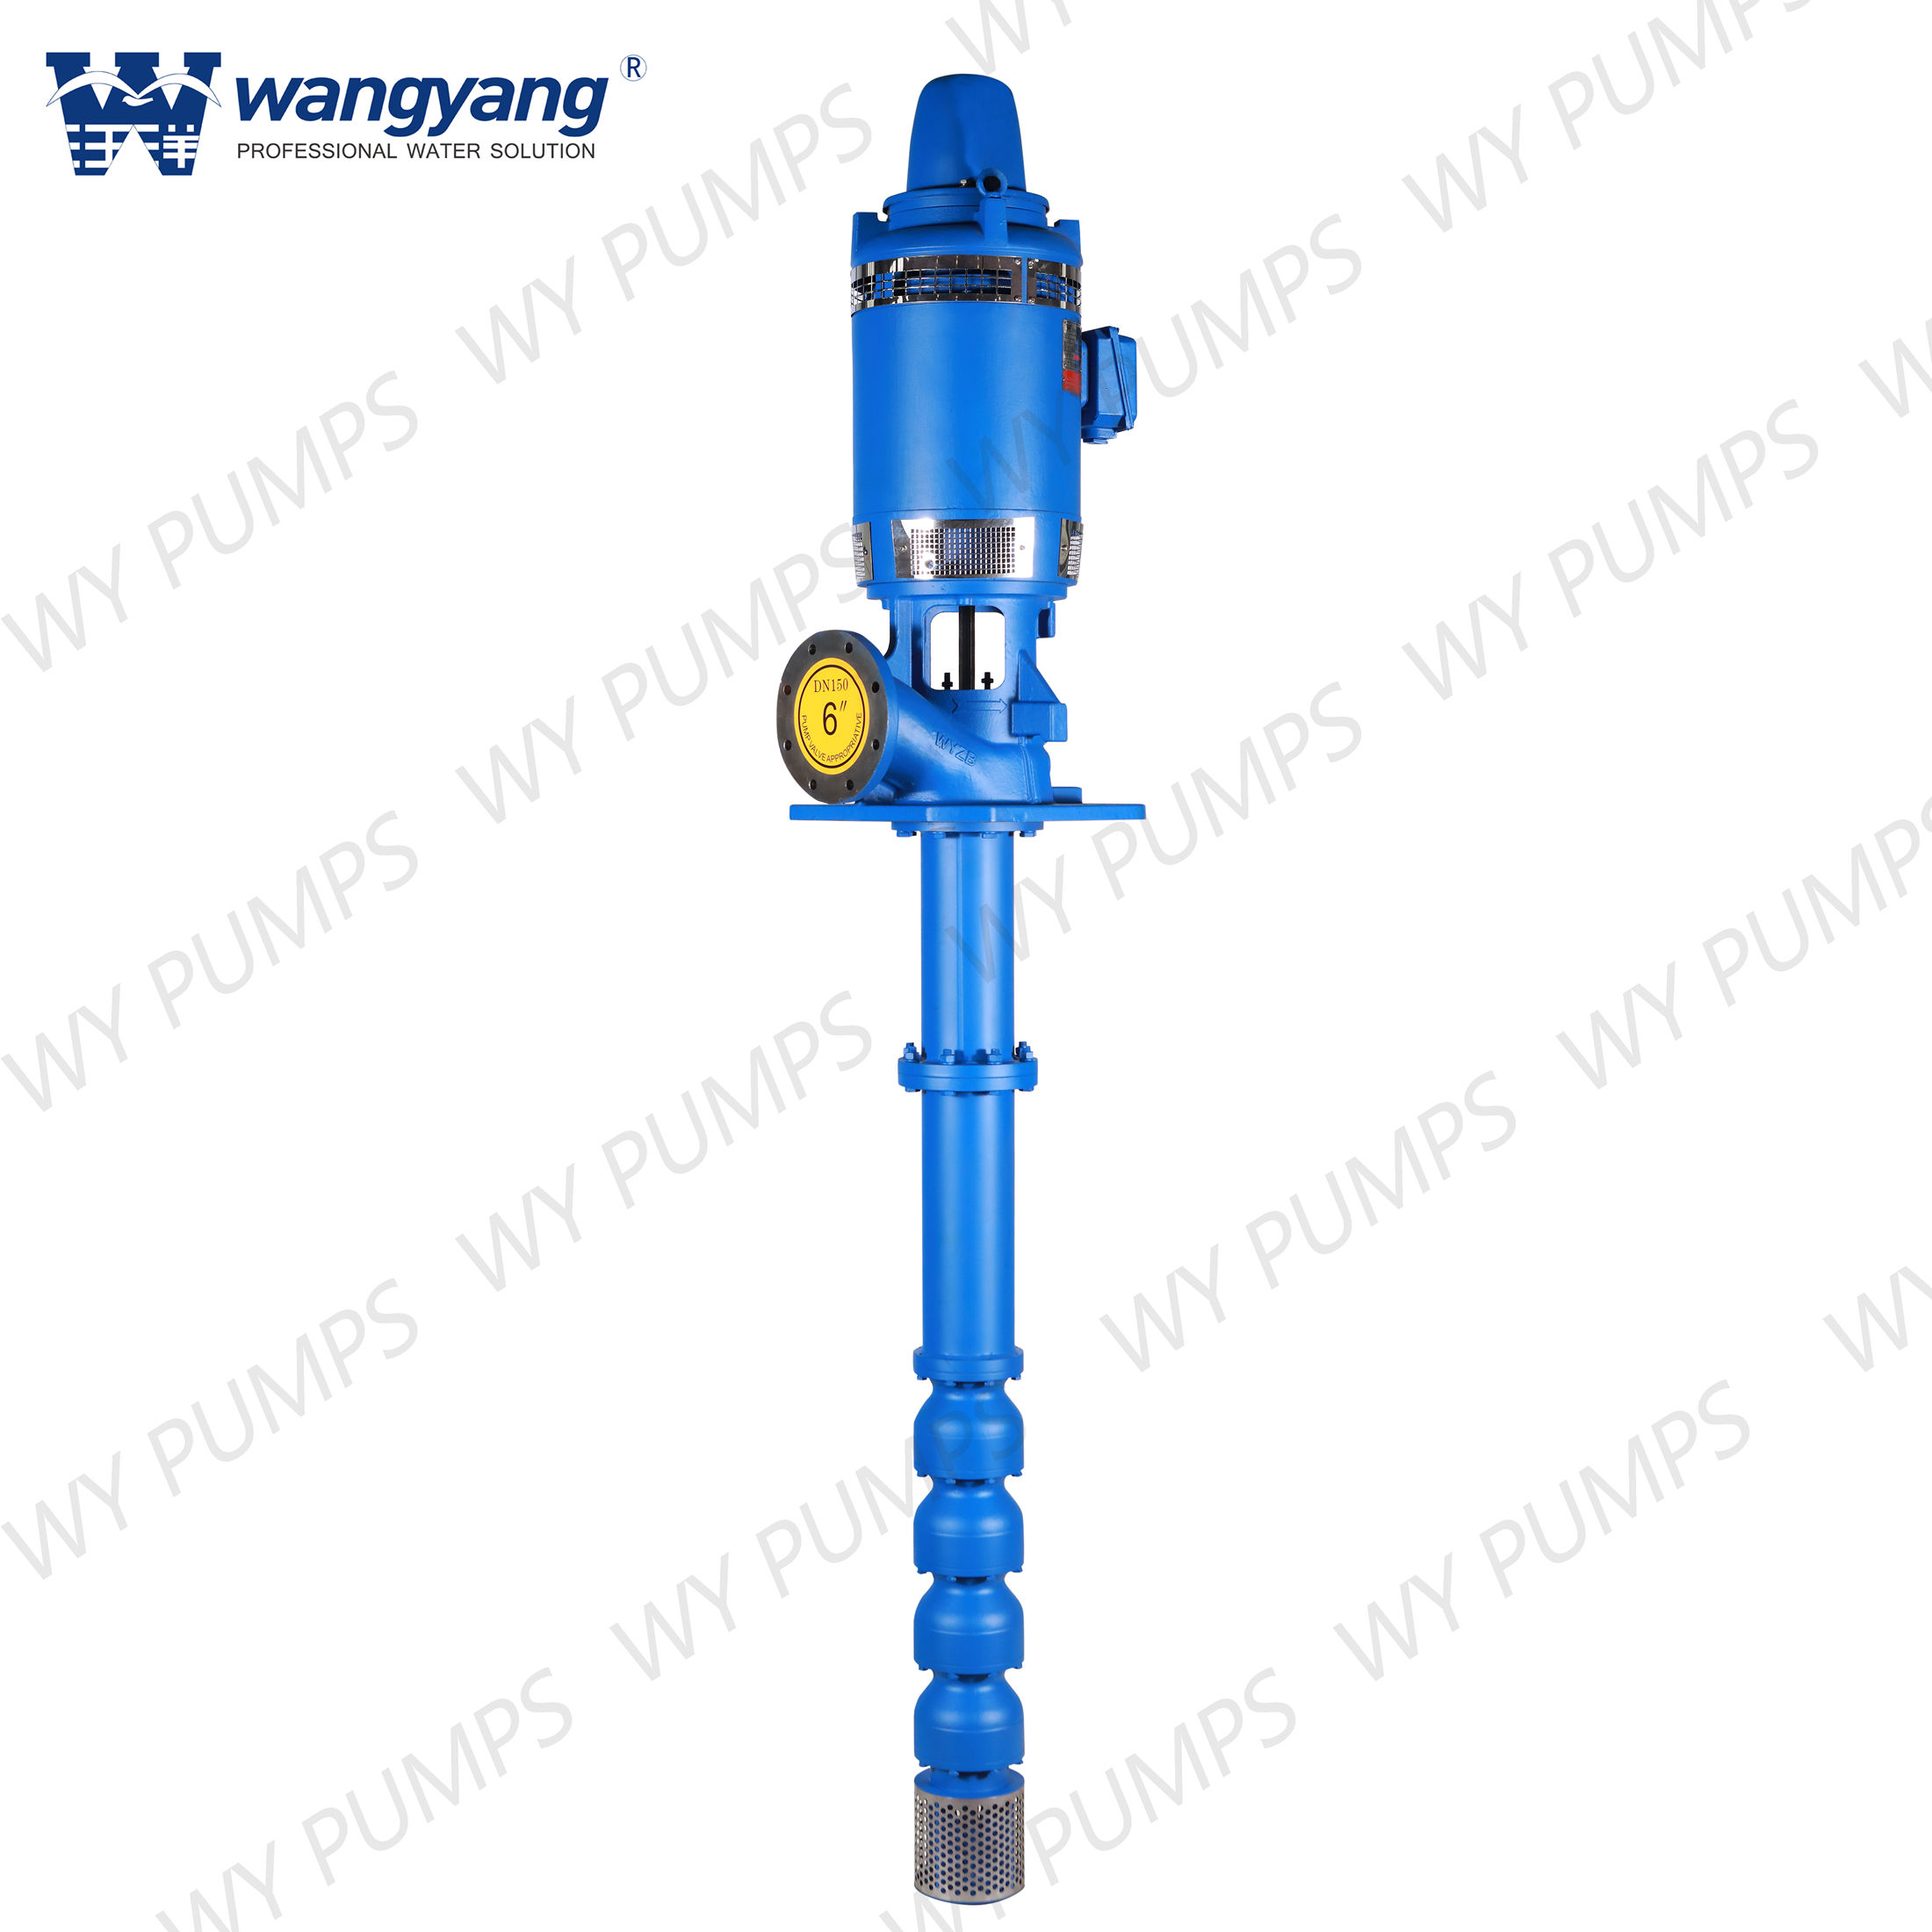 Electrical Water Lubricated Single Stage Vertical Turbine Pump